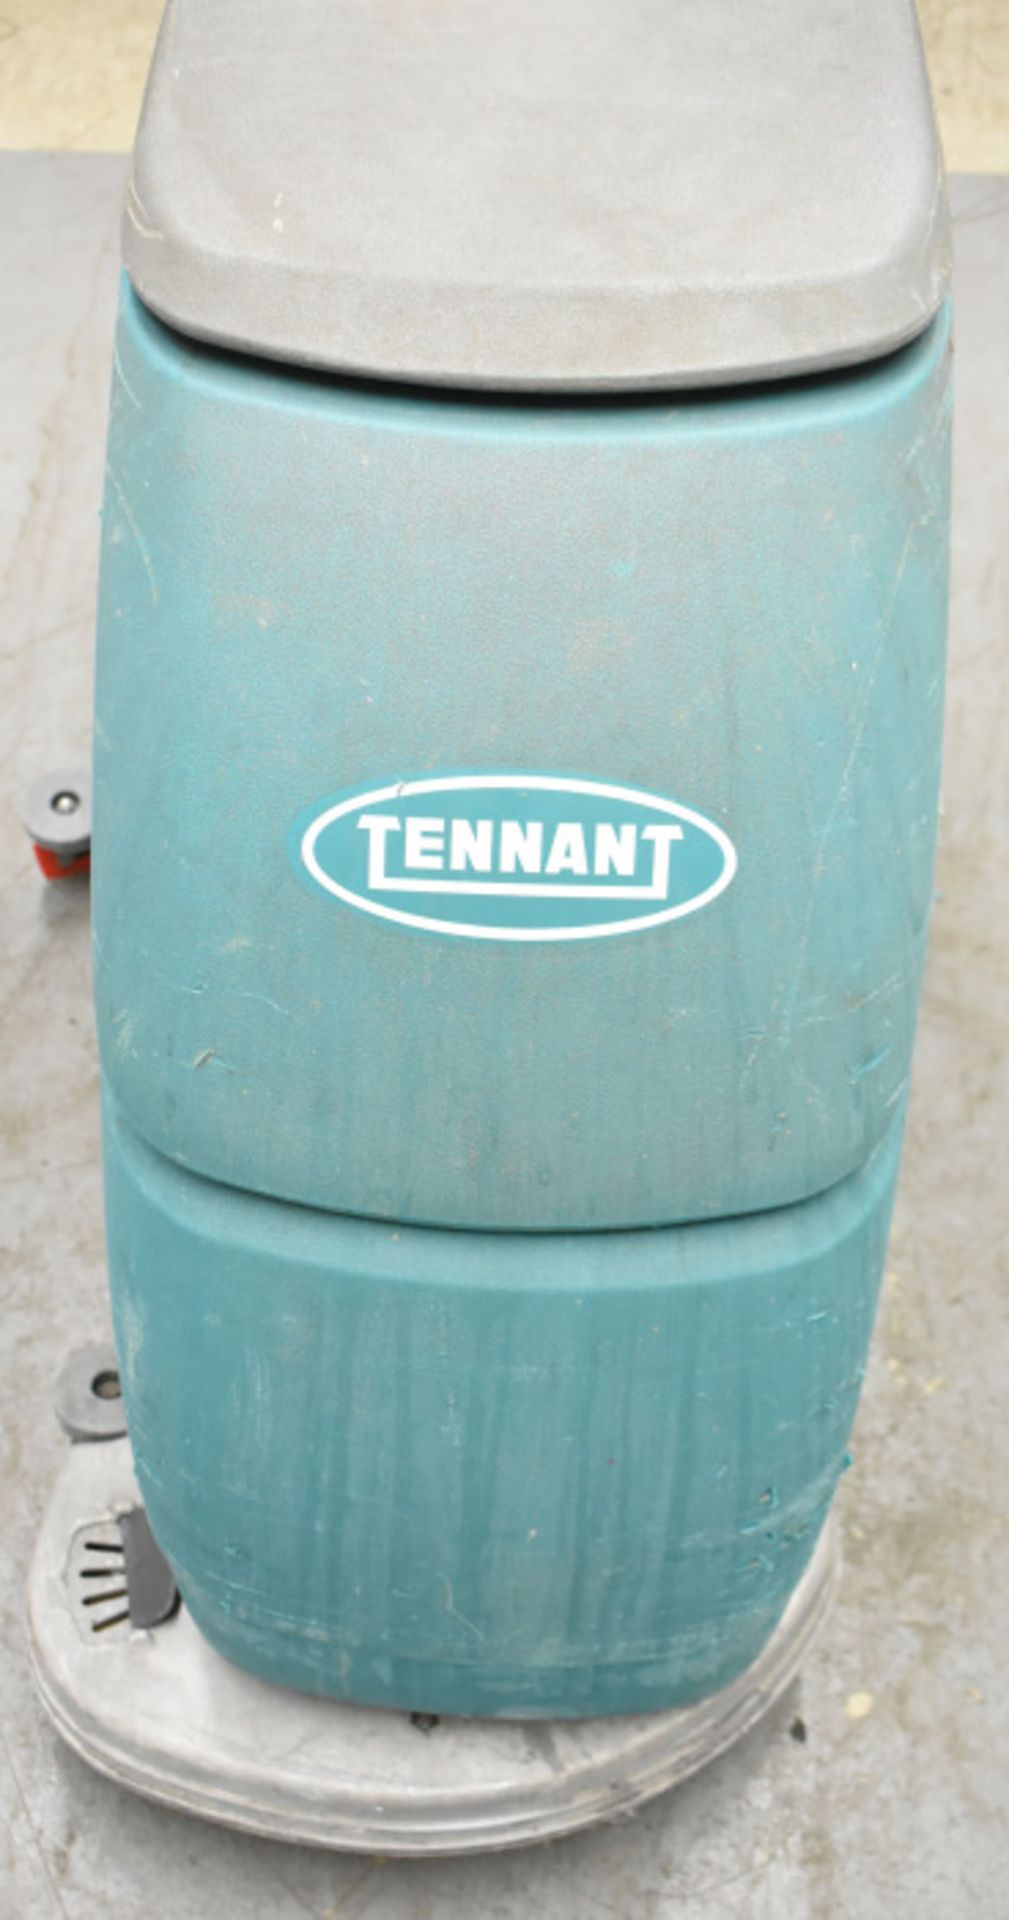 Tennant T3 Fast, comes with key and working charger, starts and runs, cleaning functionality unteste - Image 9 of 11